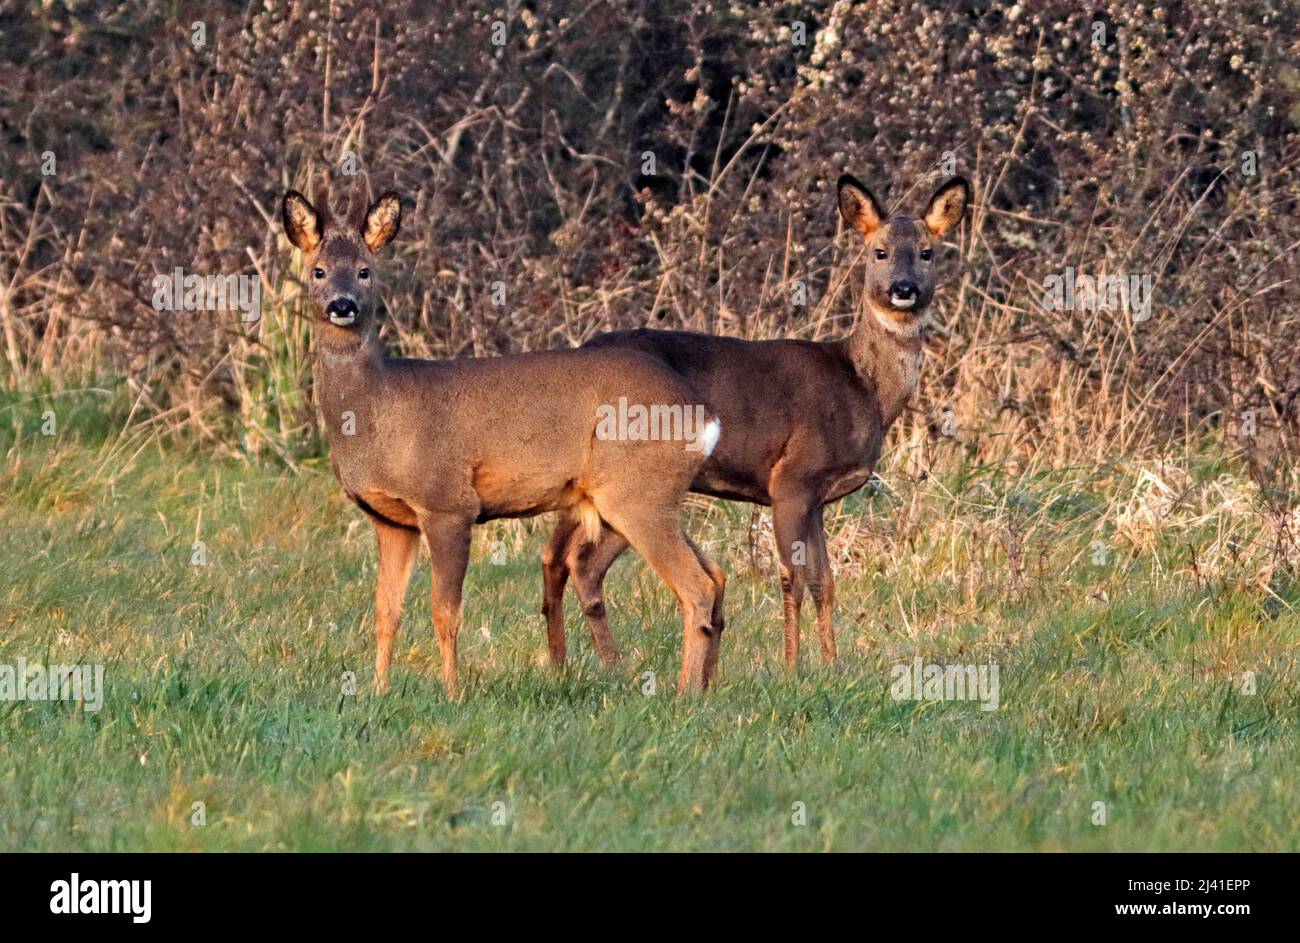 ROE DEER male (buck) and female (doe) foraging together, UK. Stock Photo